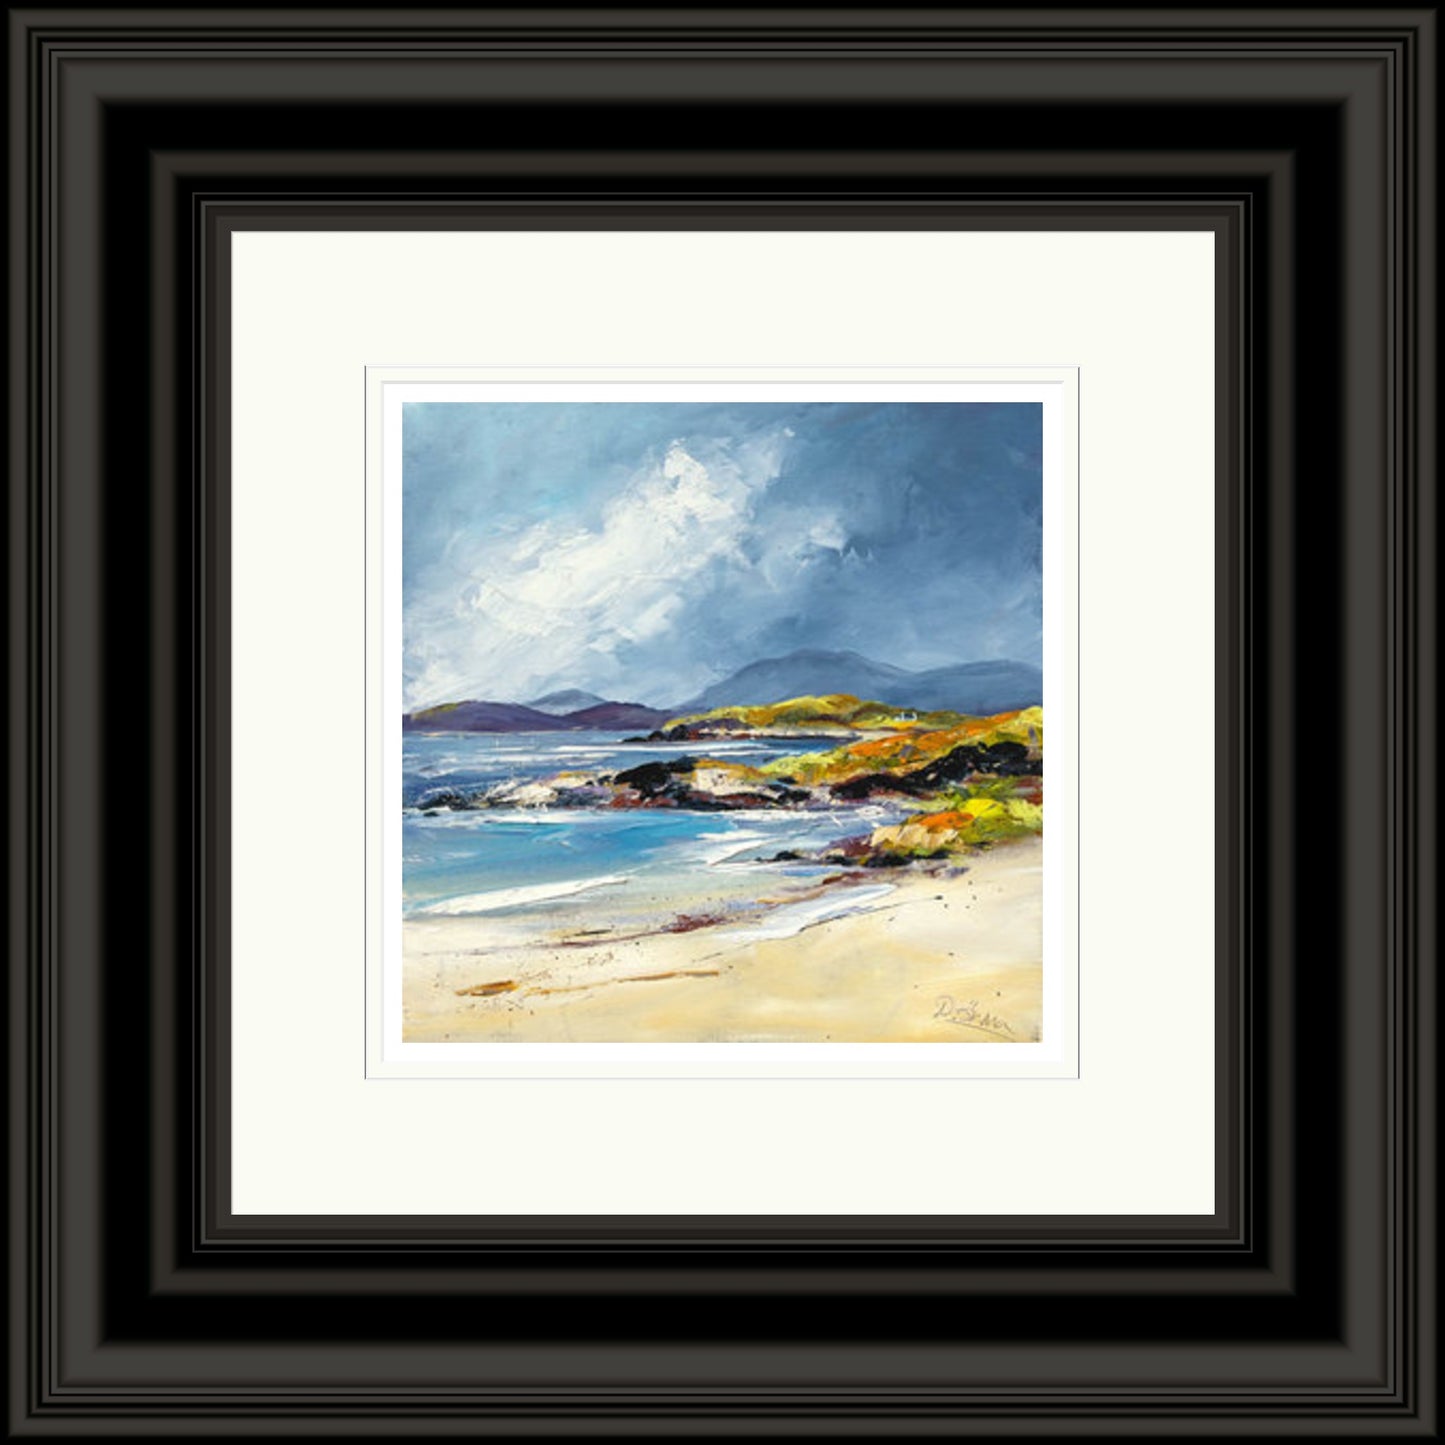 Arisaig View From Back of Keppoch by Dronma